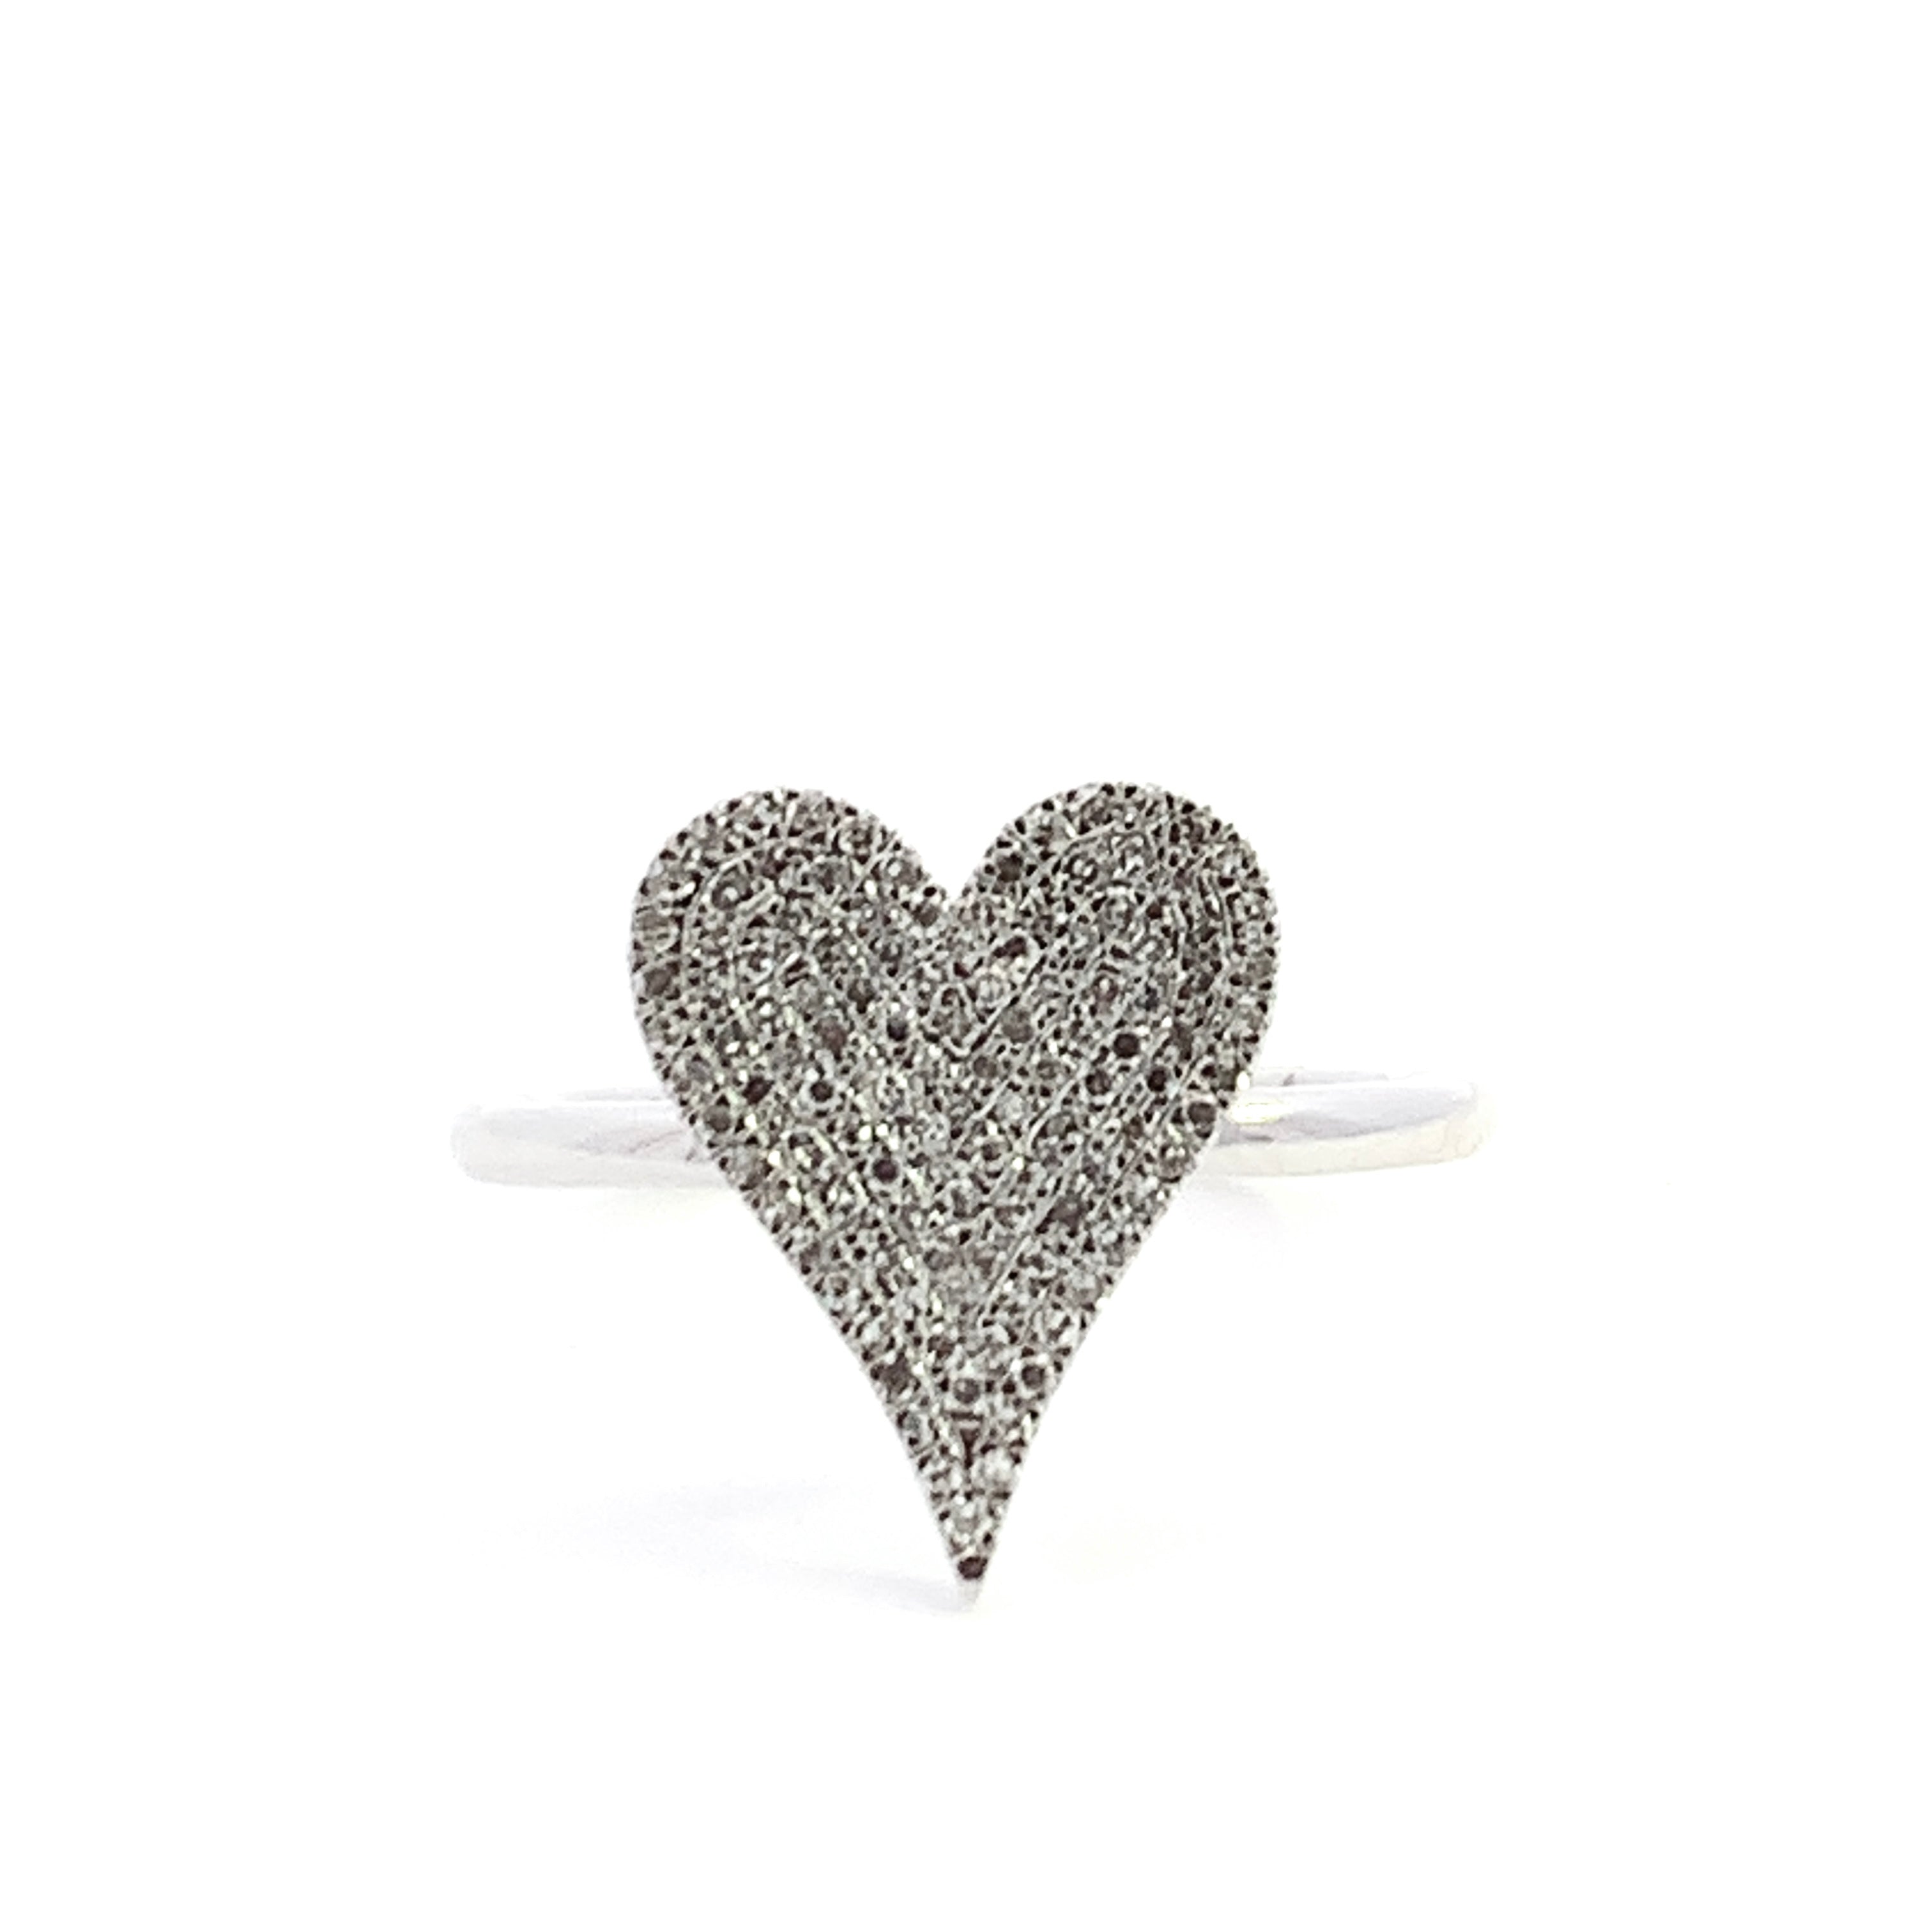 The Pave Heart Ring- 50% OFF!